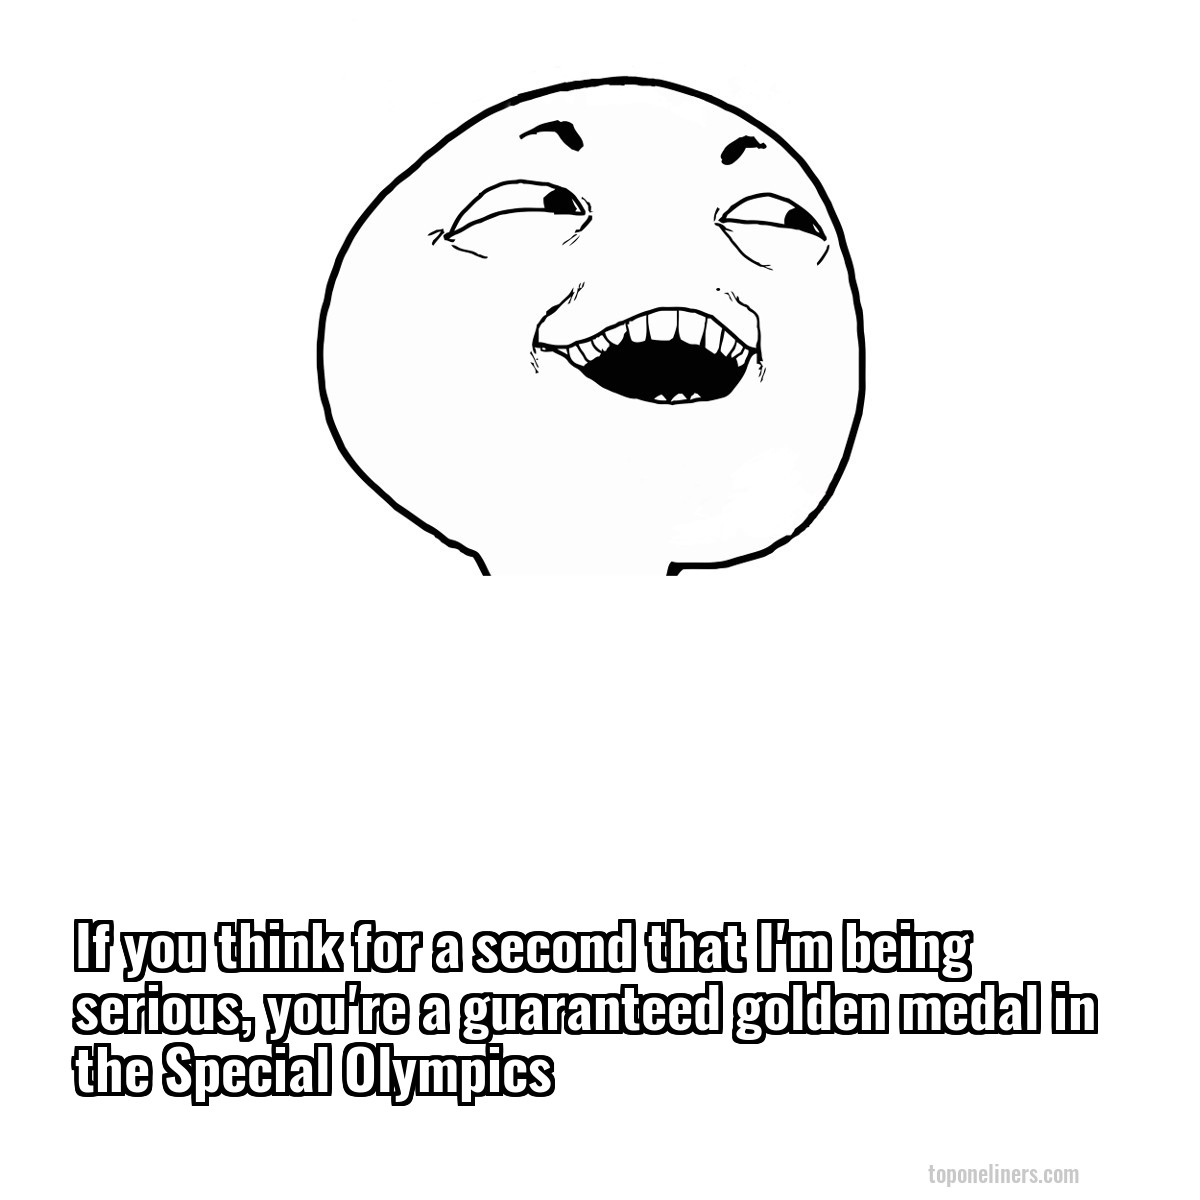 If you think for a second that I'm being serious, you're a guaranteed golden medal in the Special Olympics